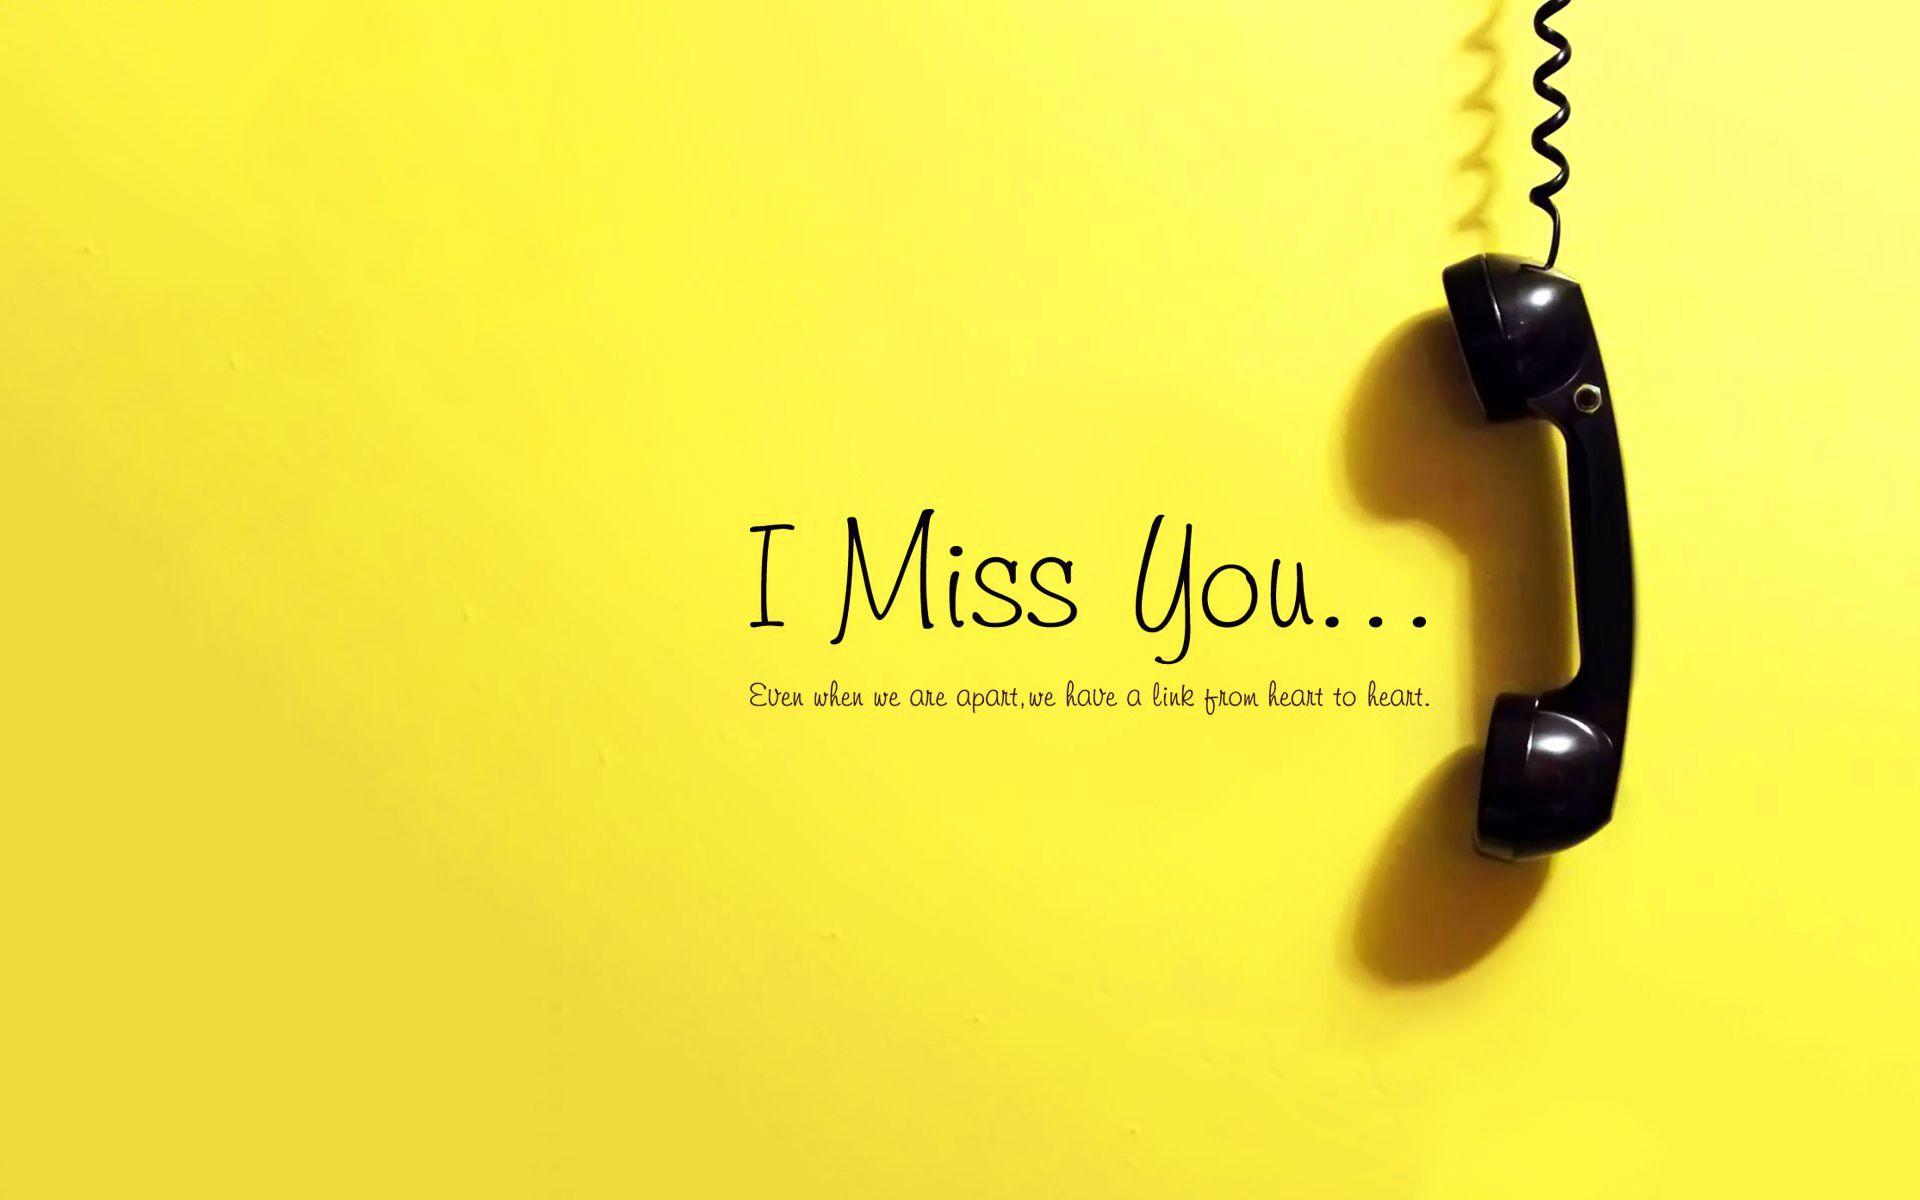 I Miss You, HD Love, 4k Wallpaper, Image, Background, Photo